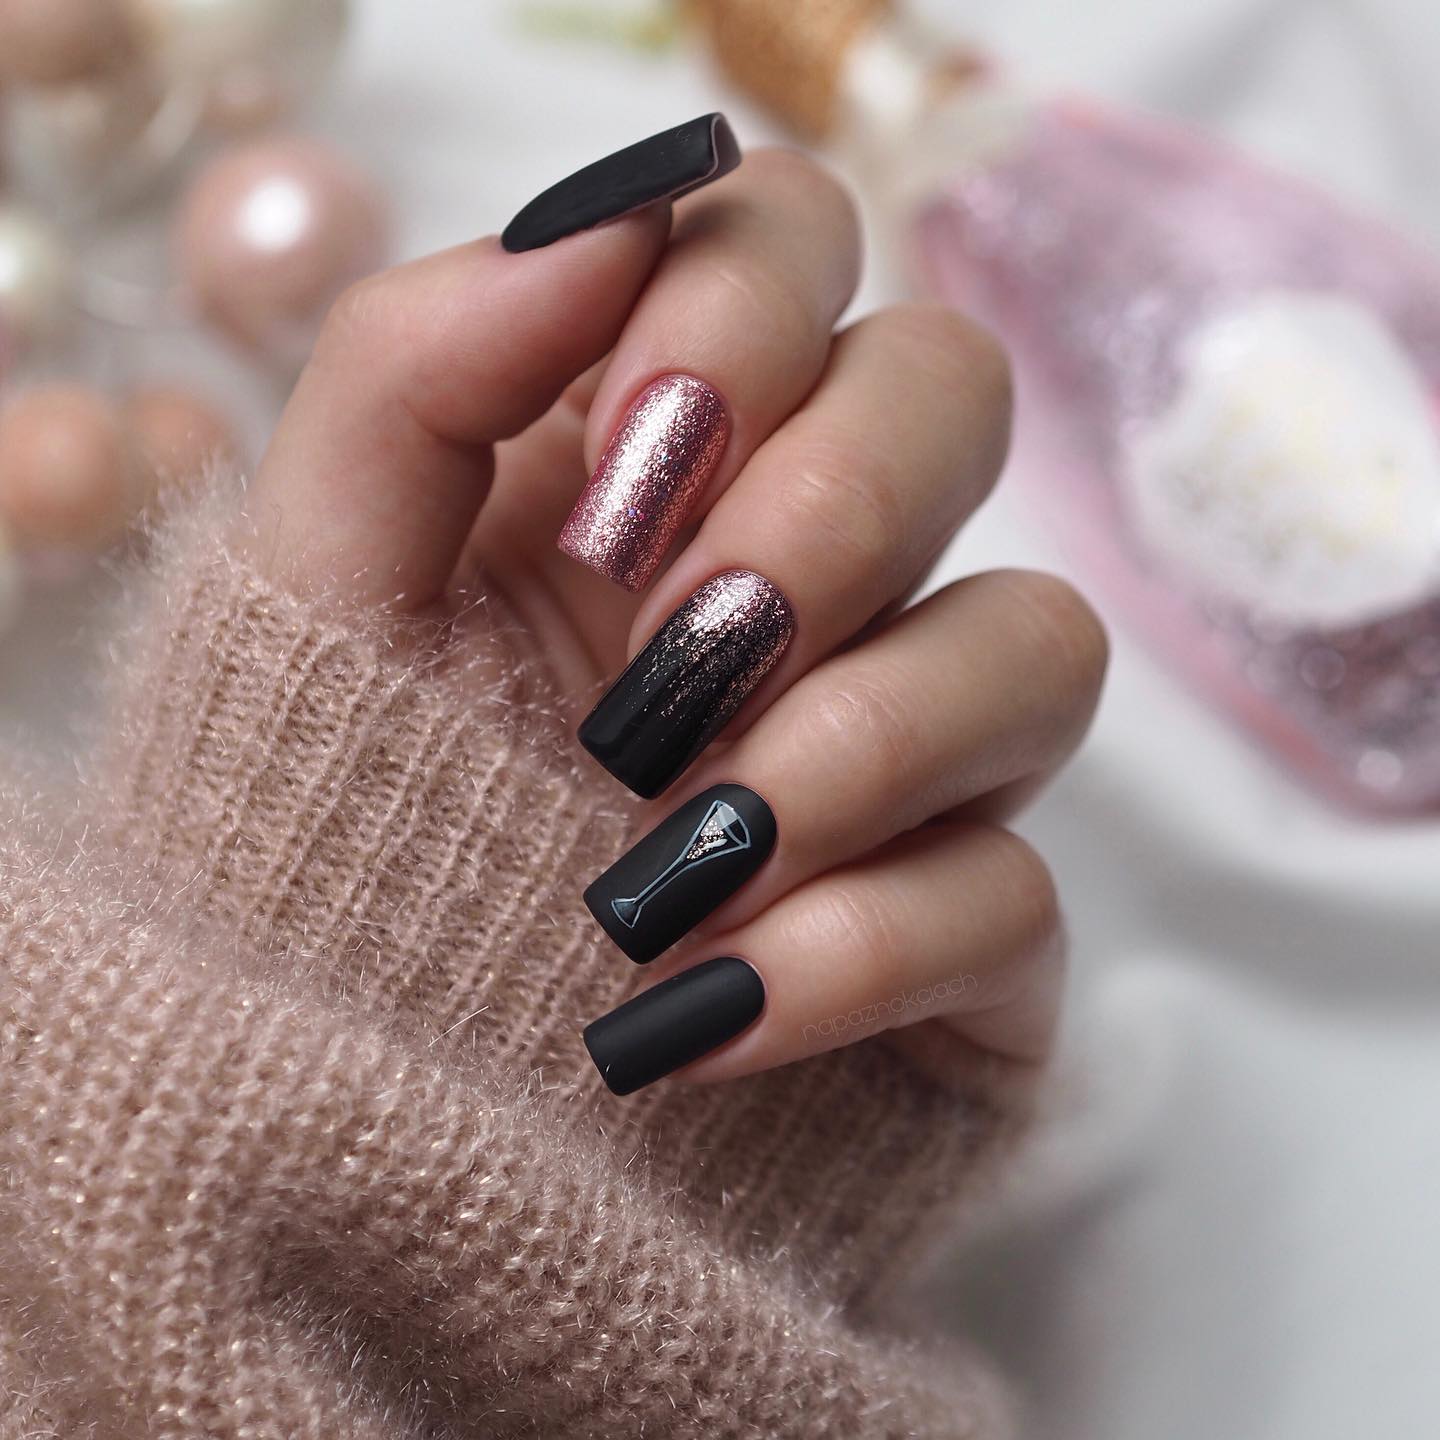 Black Matte Nails with Pink Glitter